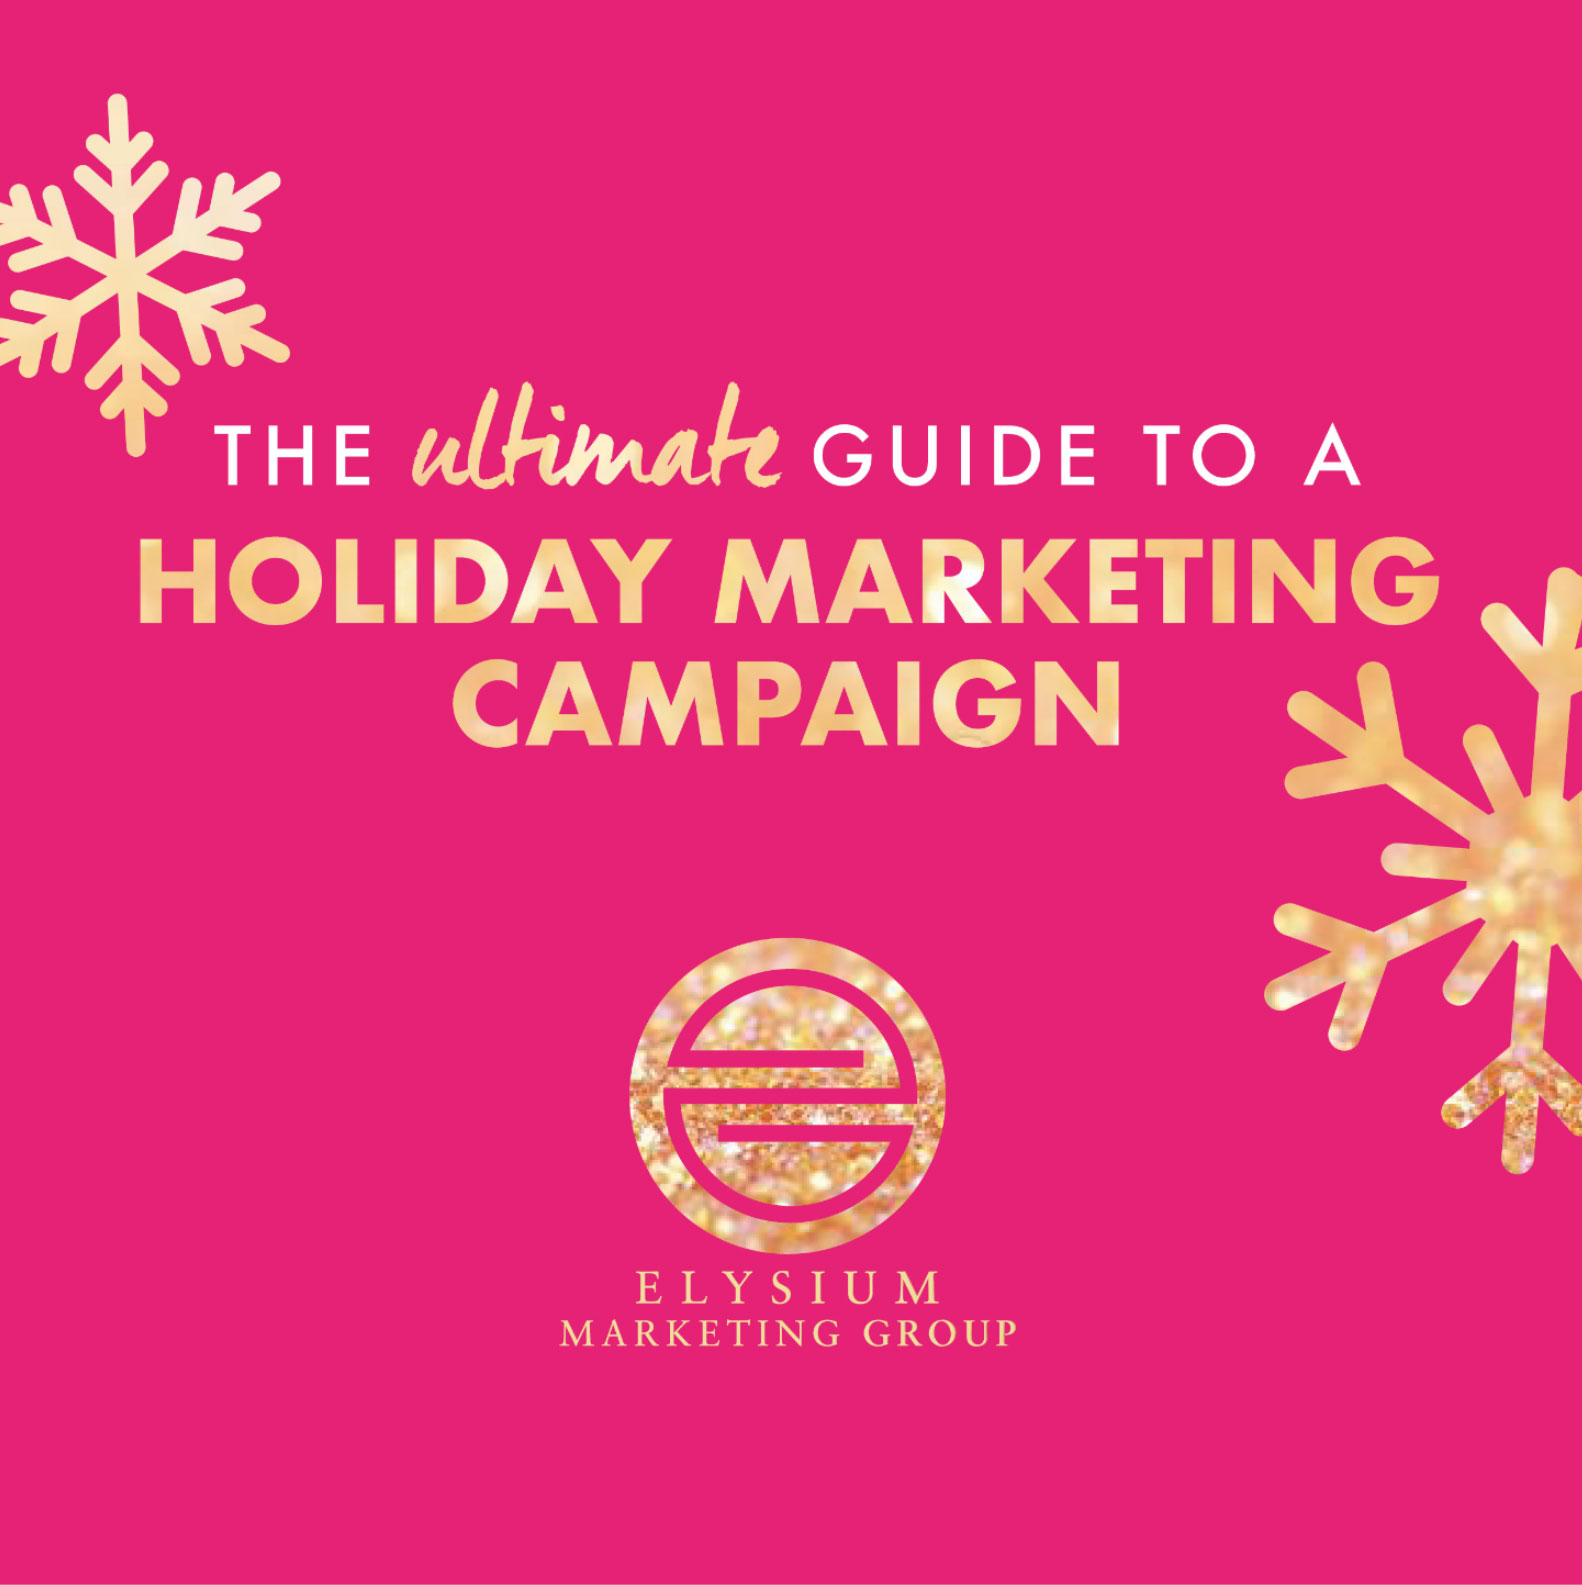 The Ultimate Guide to Holiday Marketing